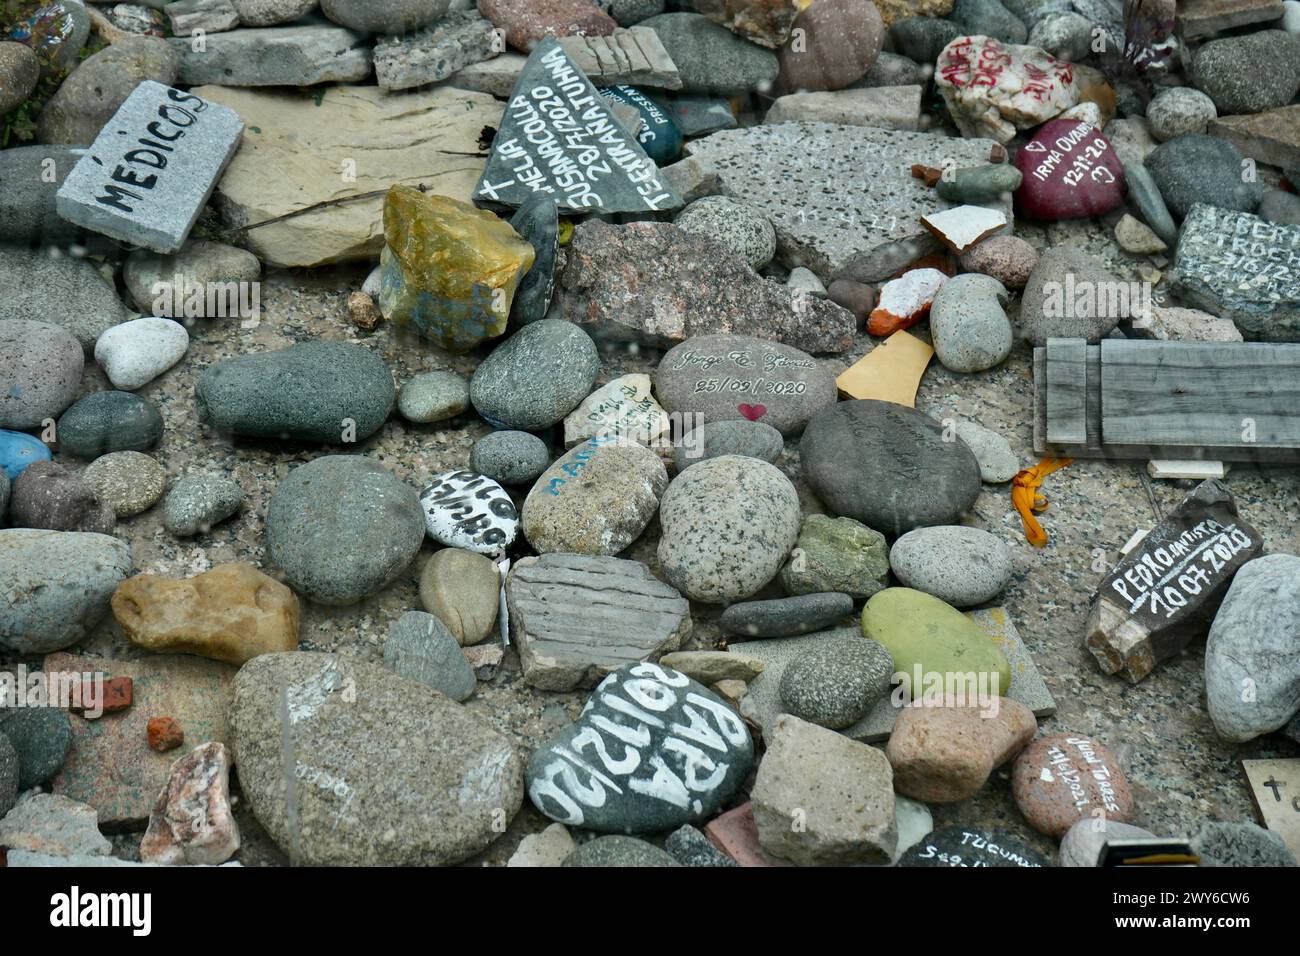 Stones under the statue of General Belgrano in Plaza De Mayo in memory of the COVID victims in Argentina. Stock Photo